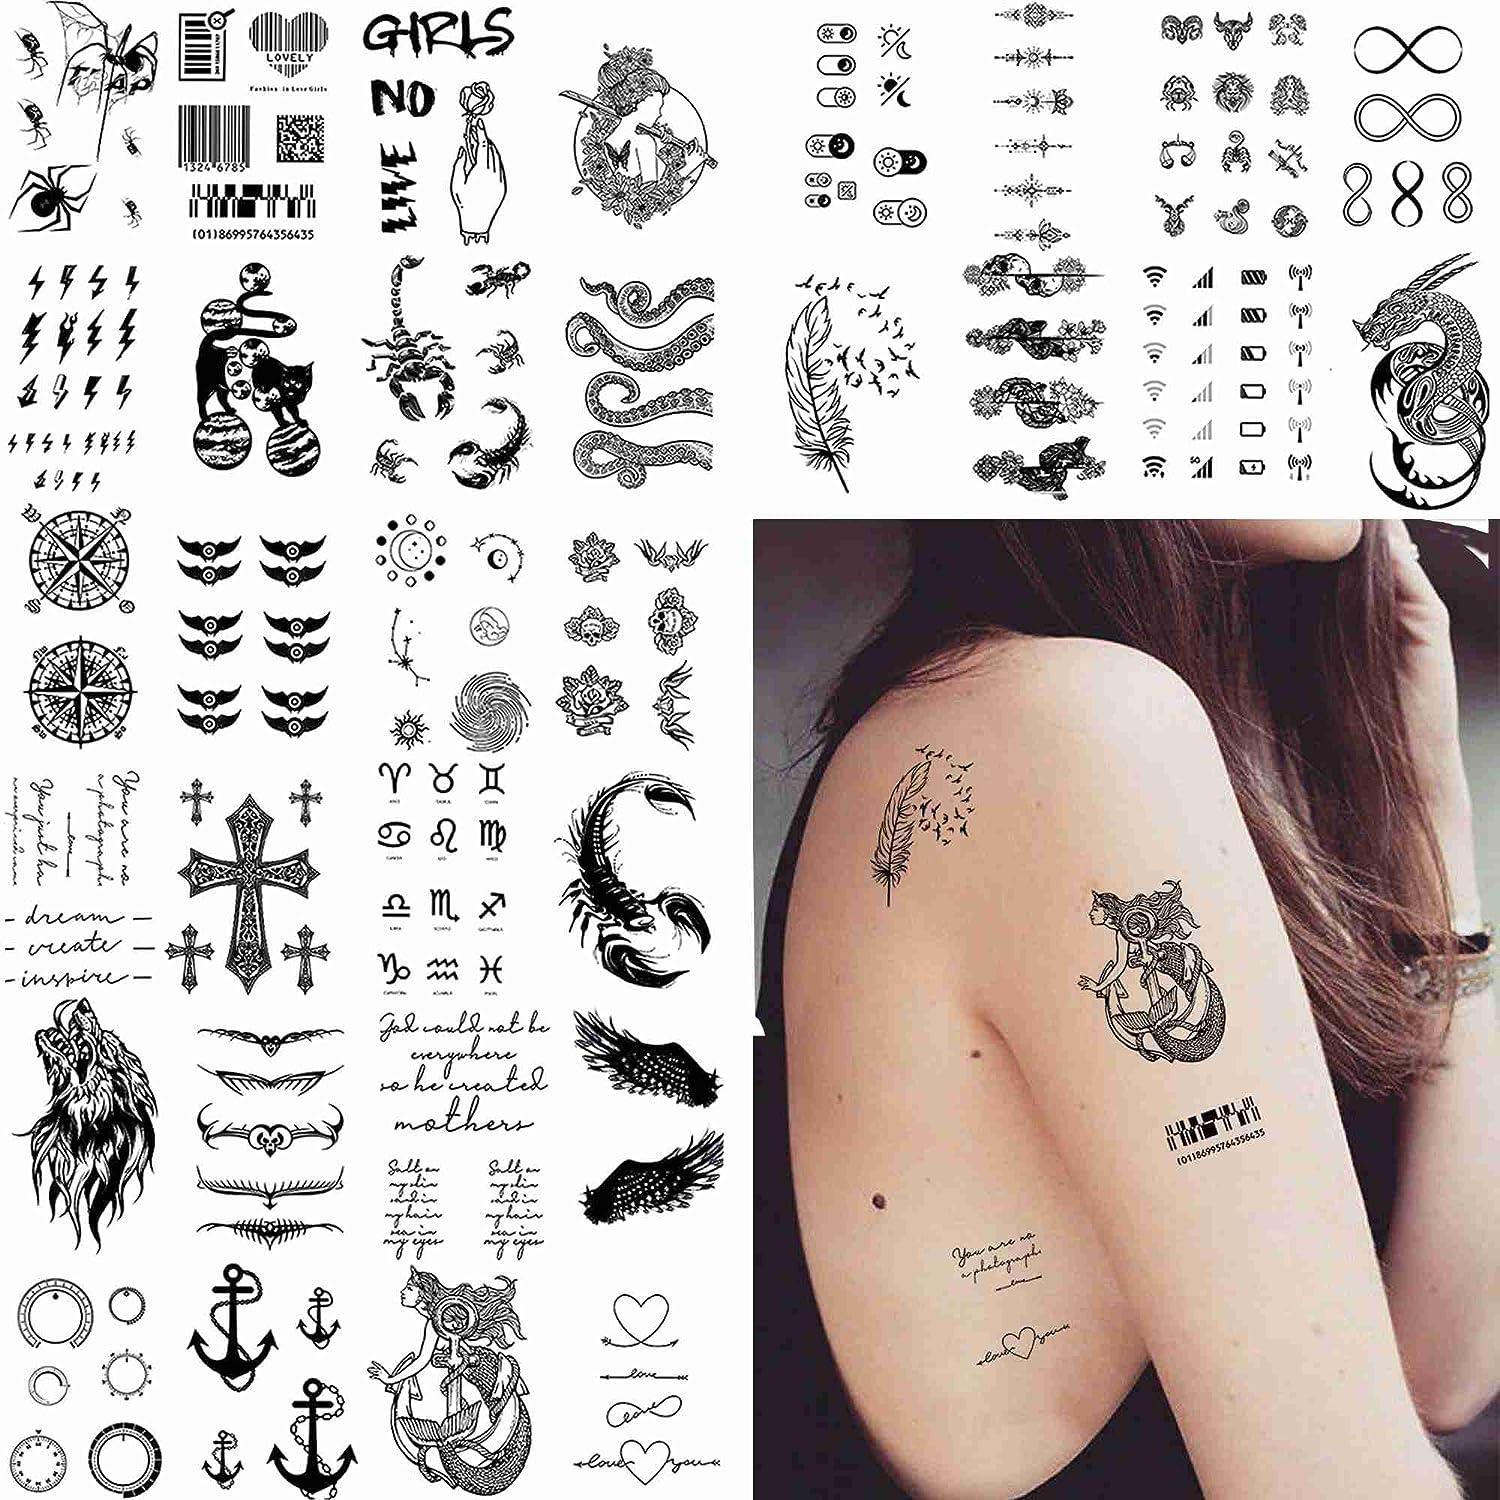 Share more than 219 cool tattoos pictures best